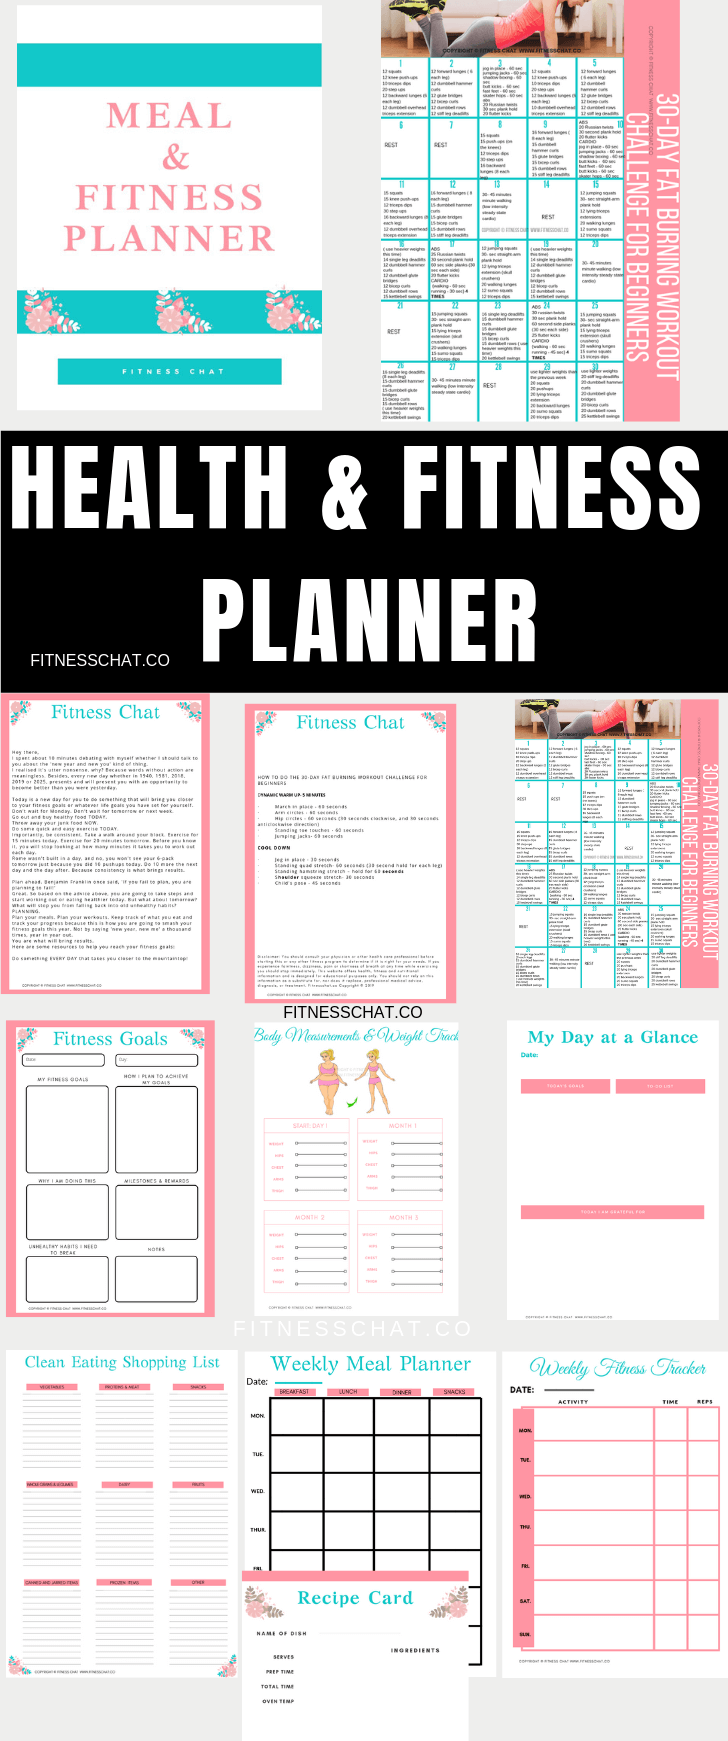 14 weekly fitness Planner ideas